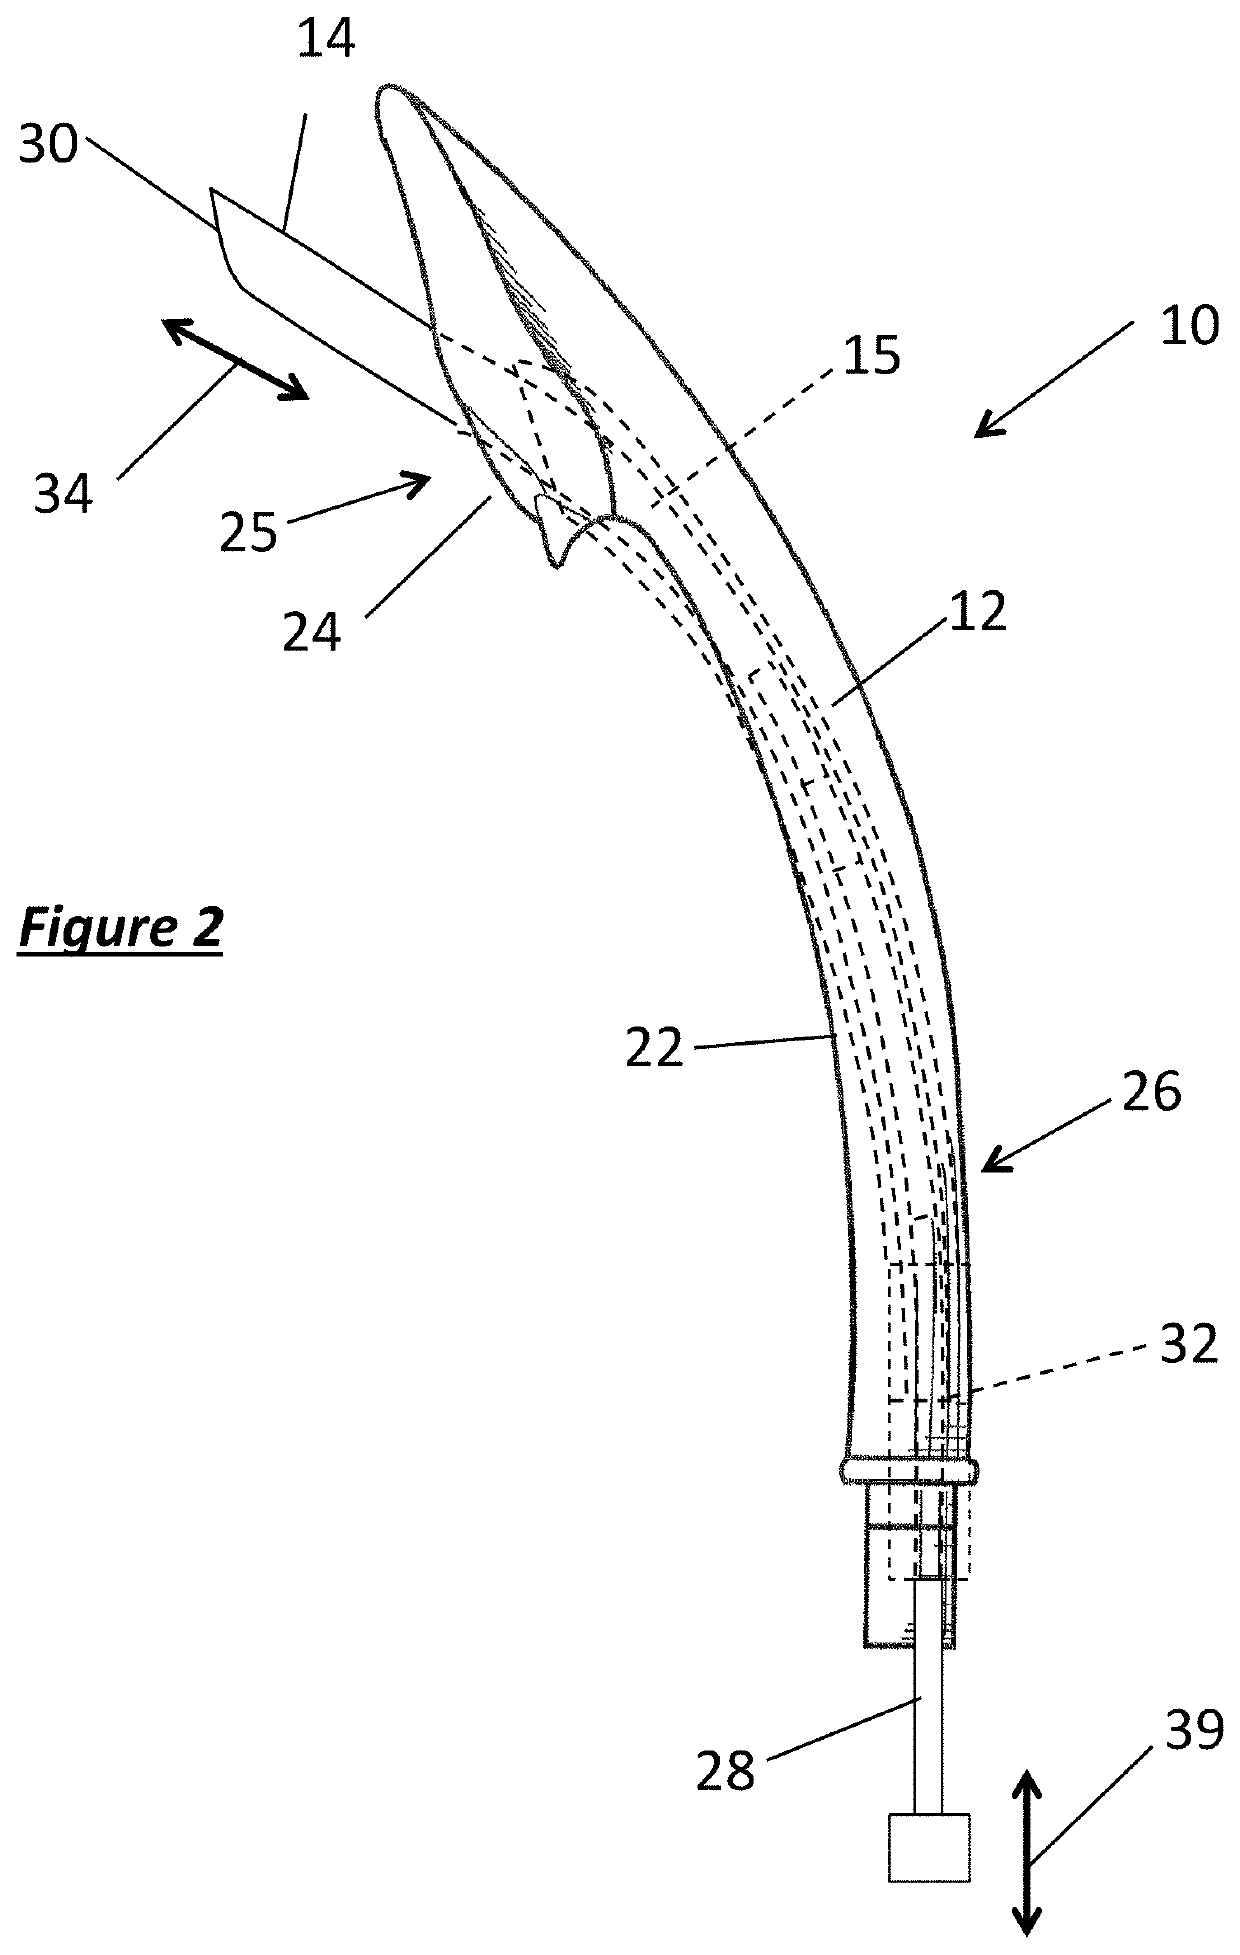 Intubation devices and methods of use